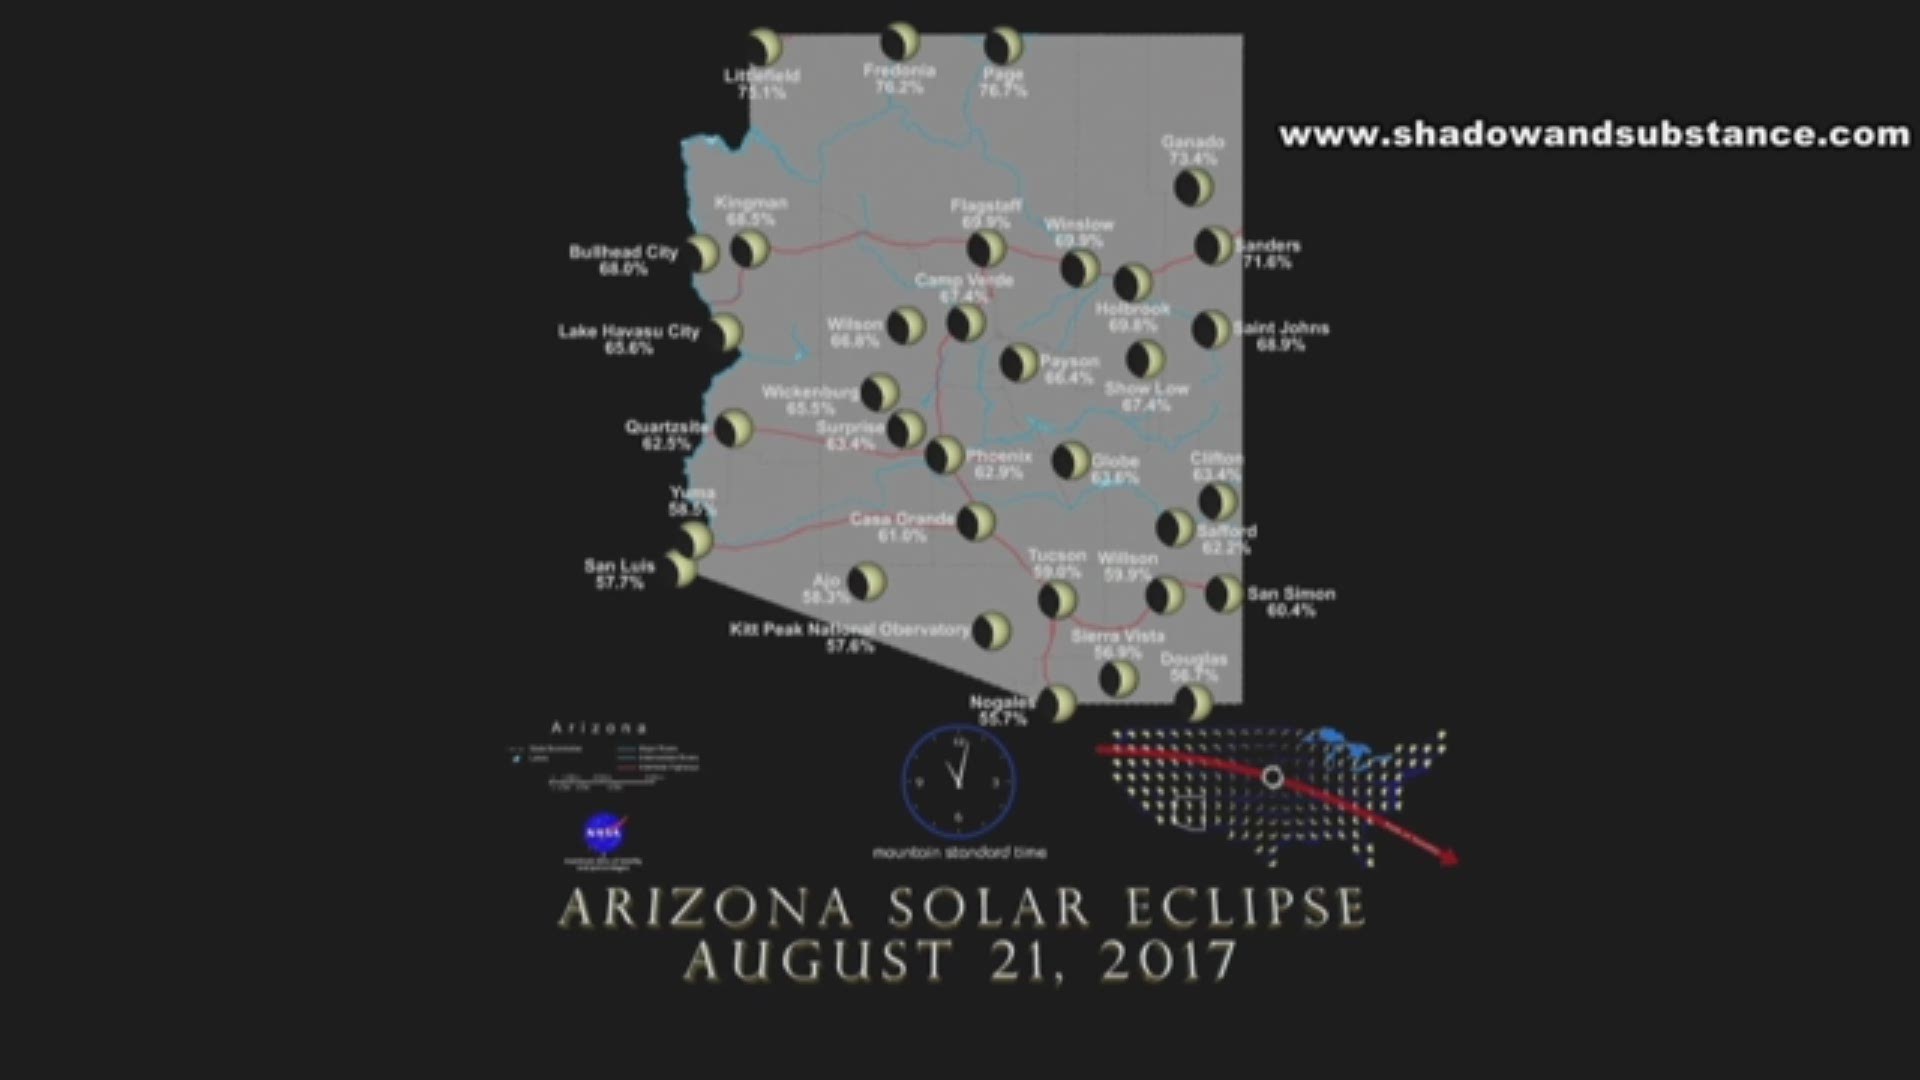 'Shadow and Substance' created animations of how the solar eclipse will look like in each state on August 21.